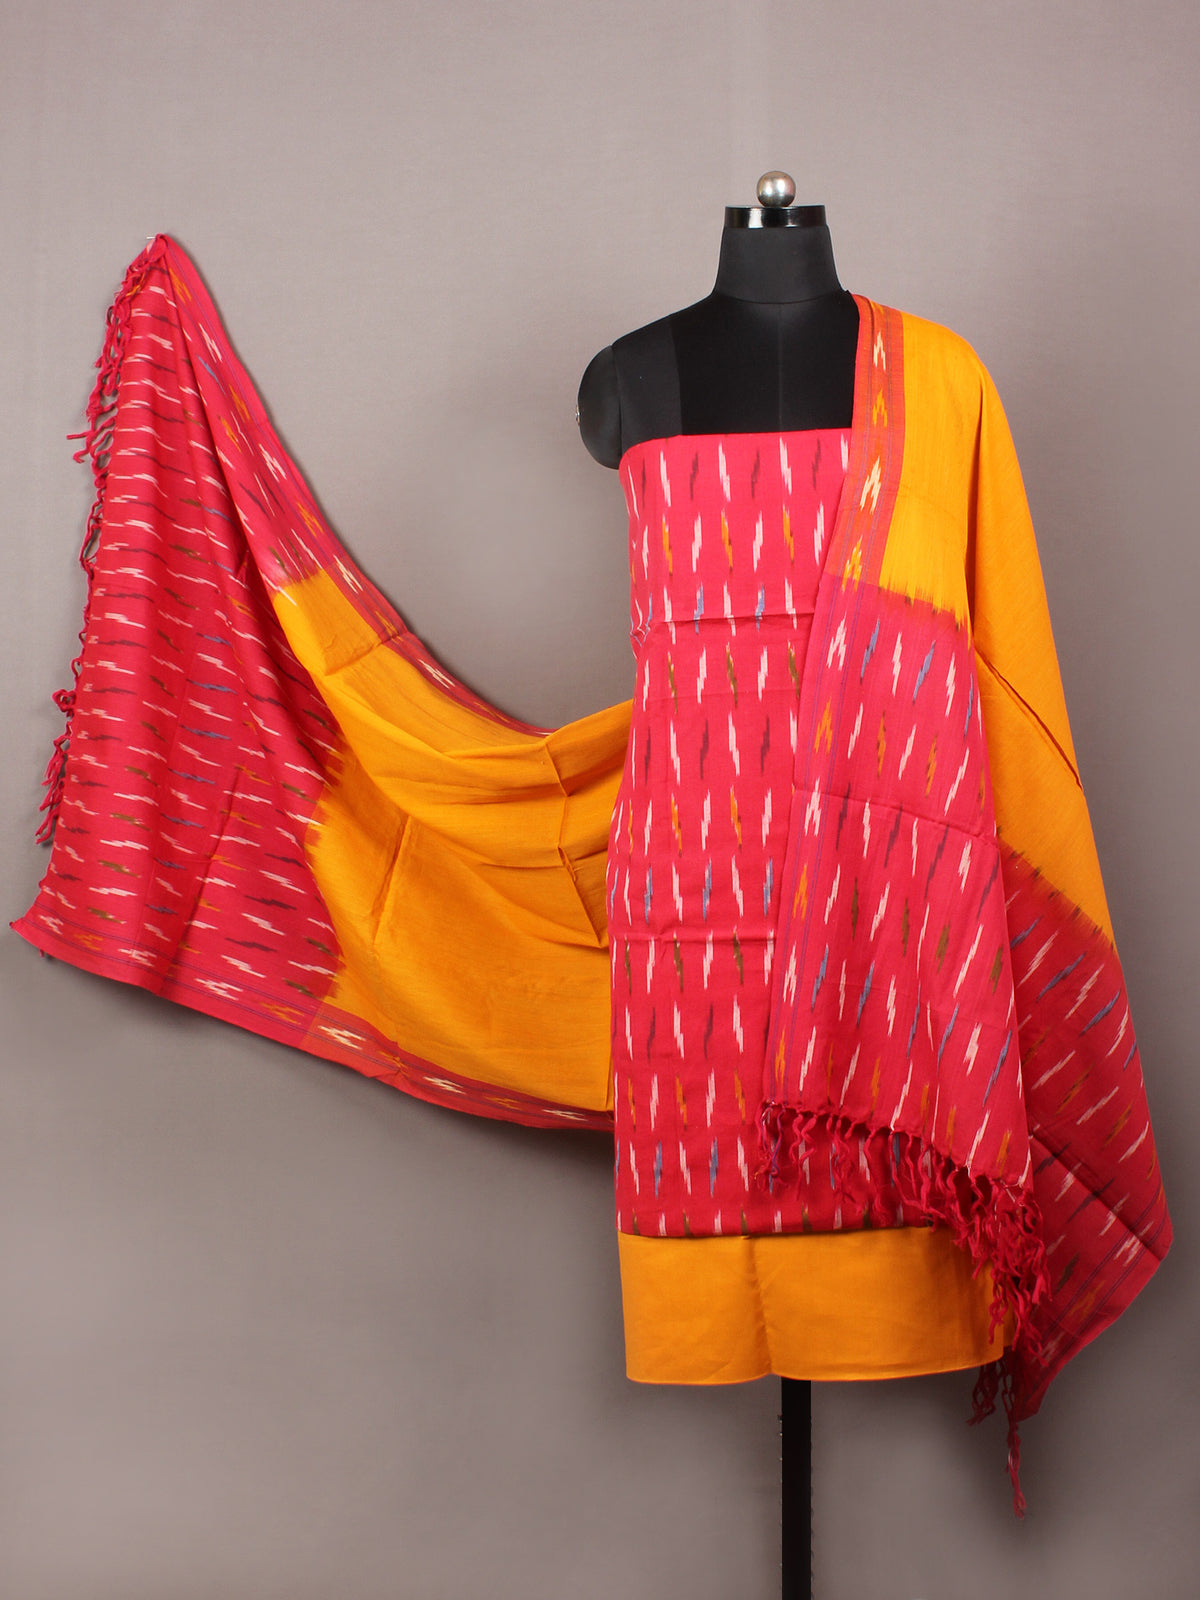 Red Yellow Off White Ikat Handwoven Cotton Suit Fabric Set of 3 - S1002010